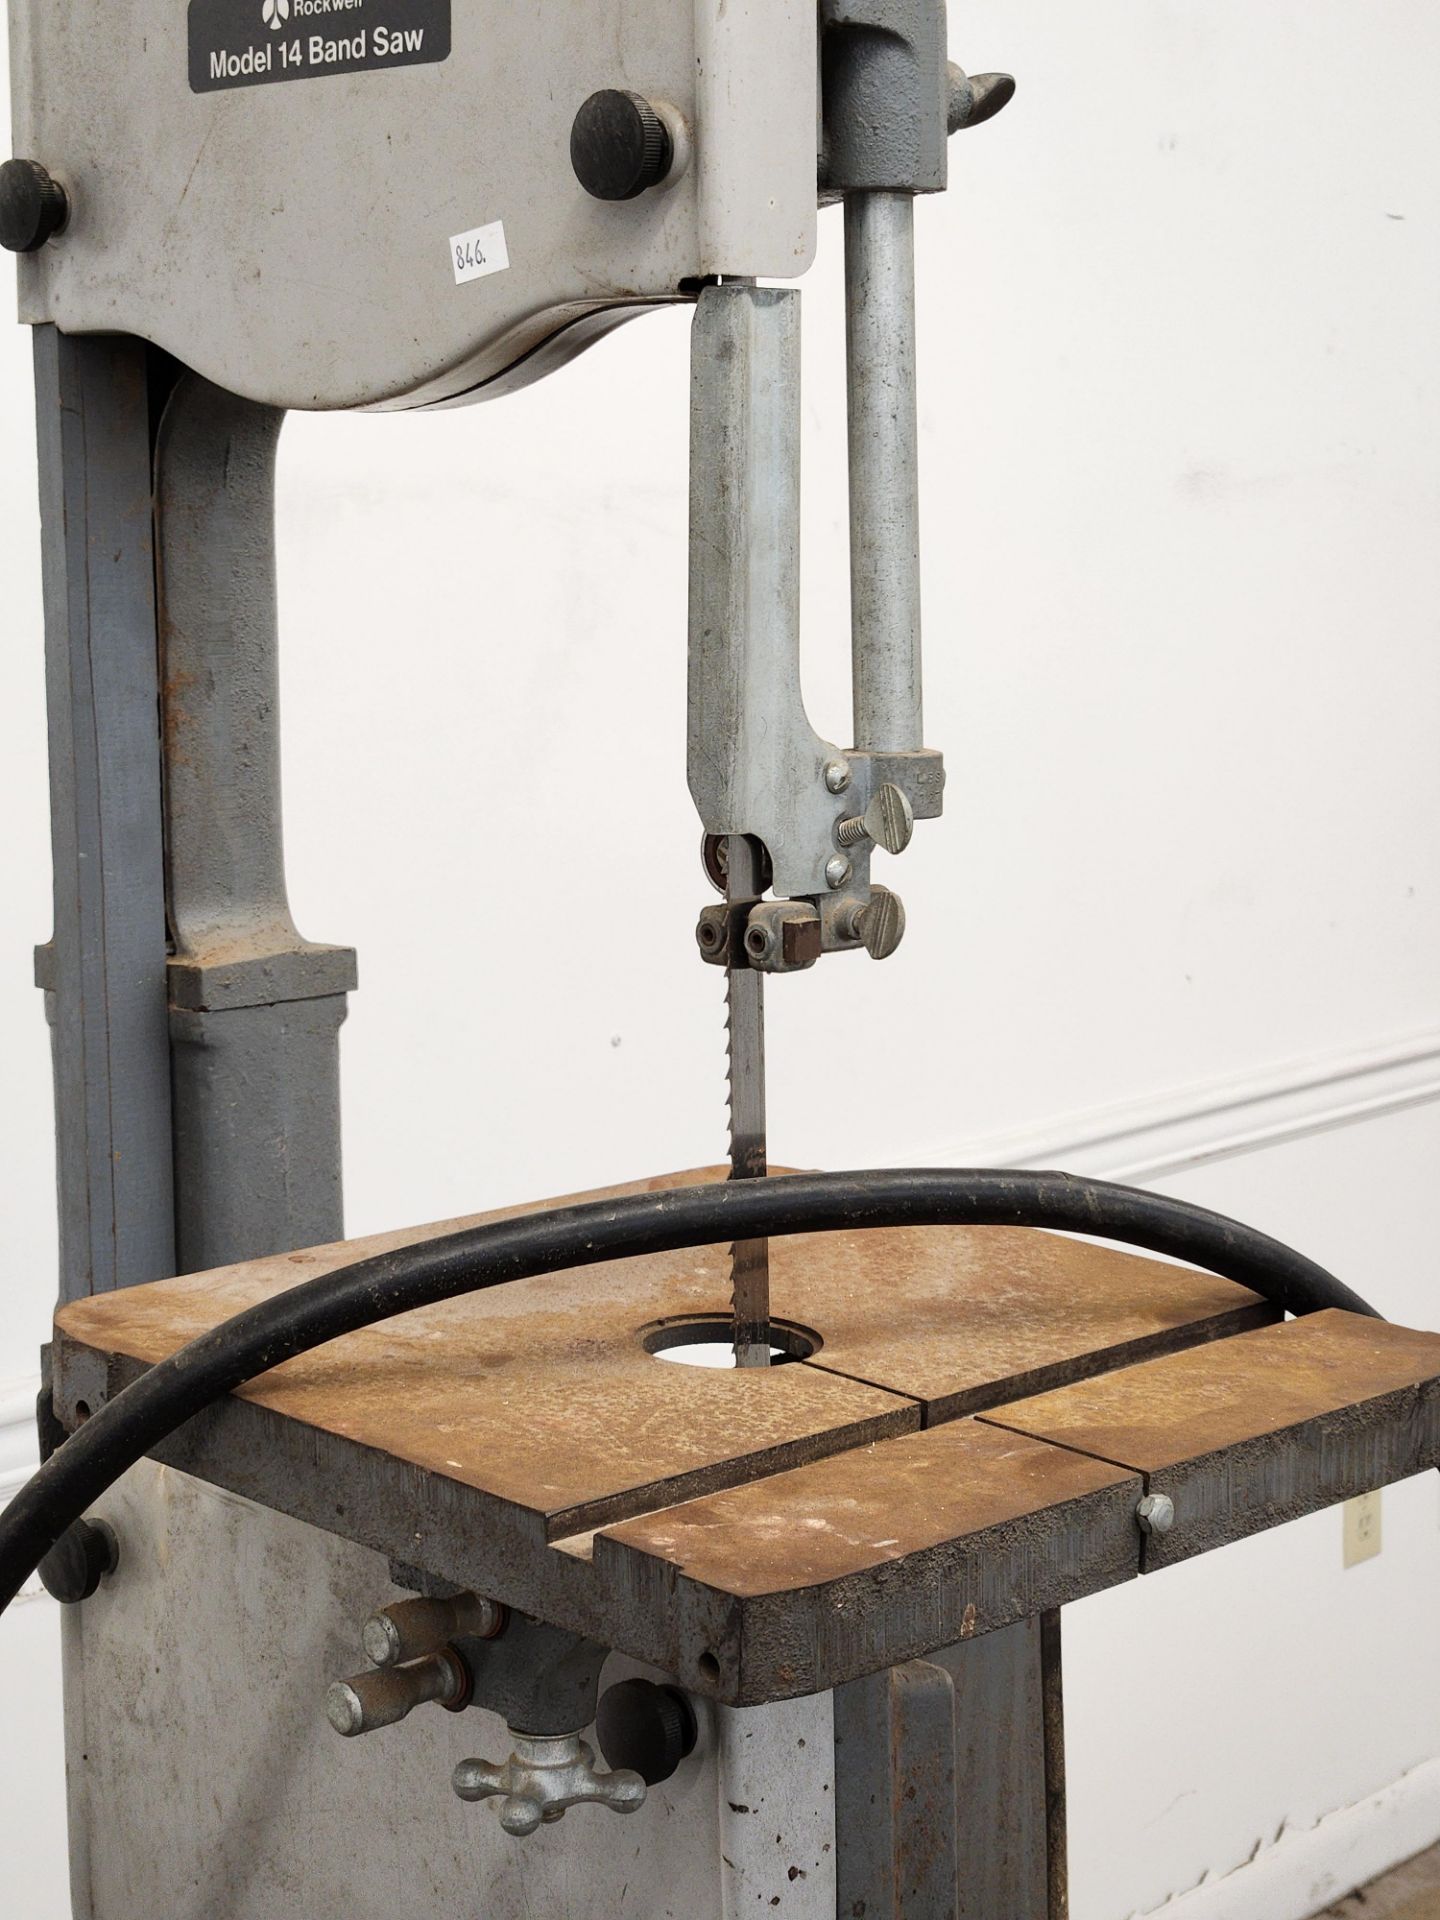 Rockwell Model 14 Band Saw - Image 2 of 5